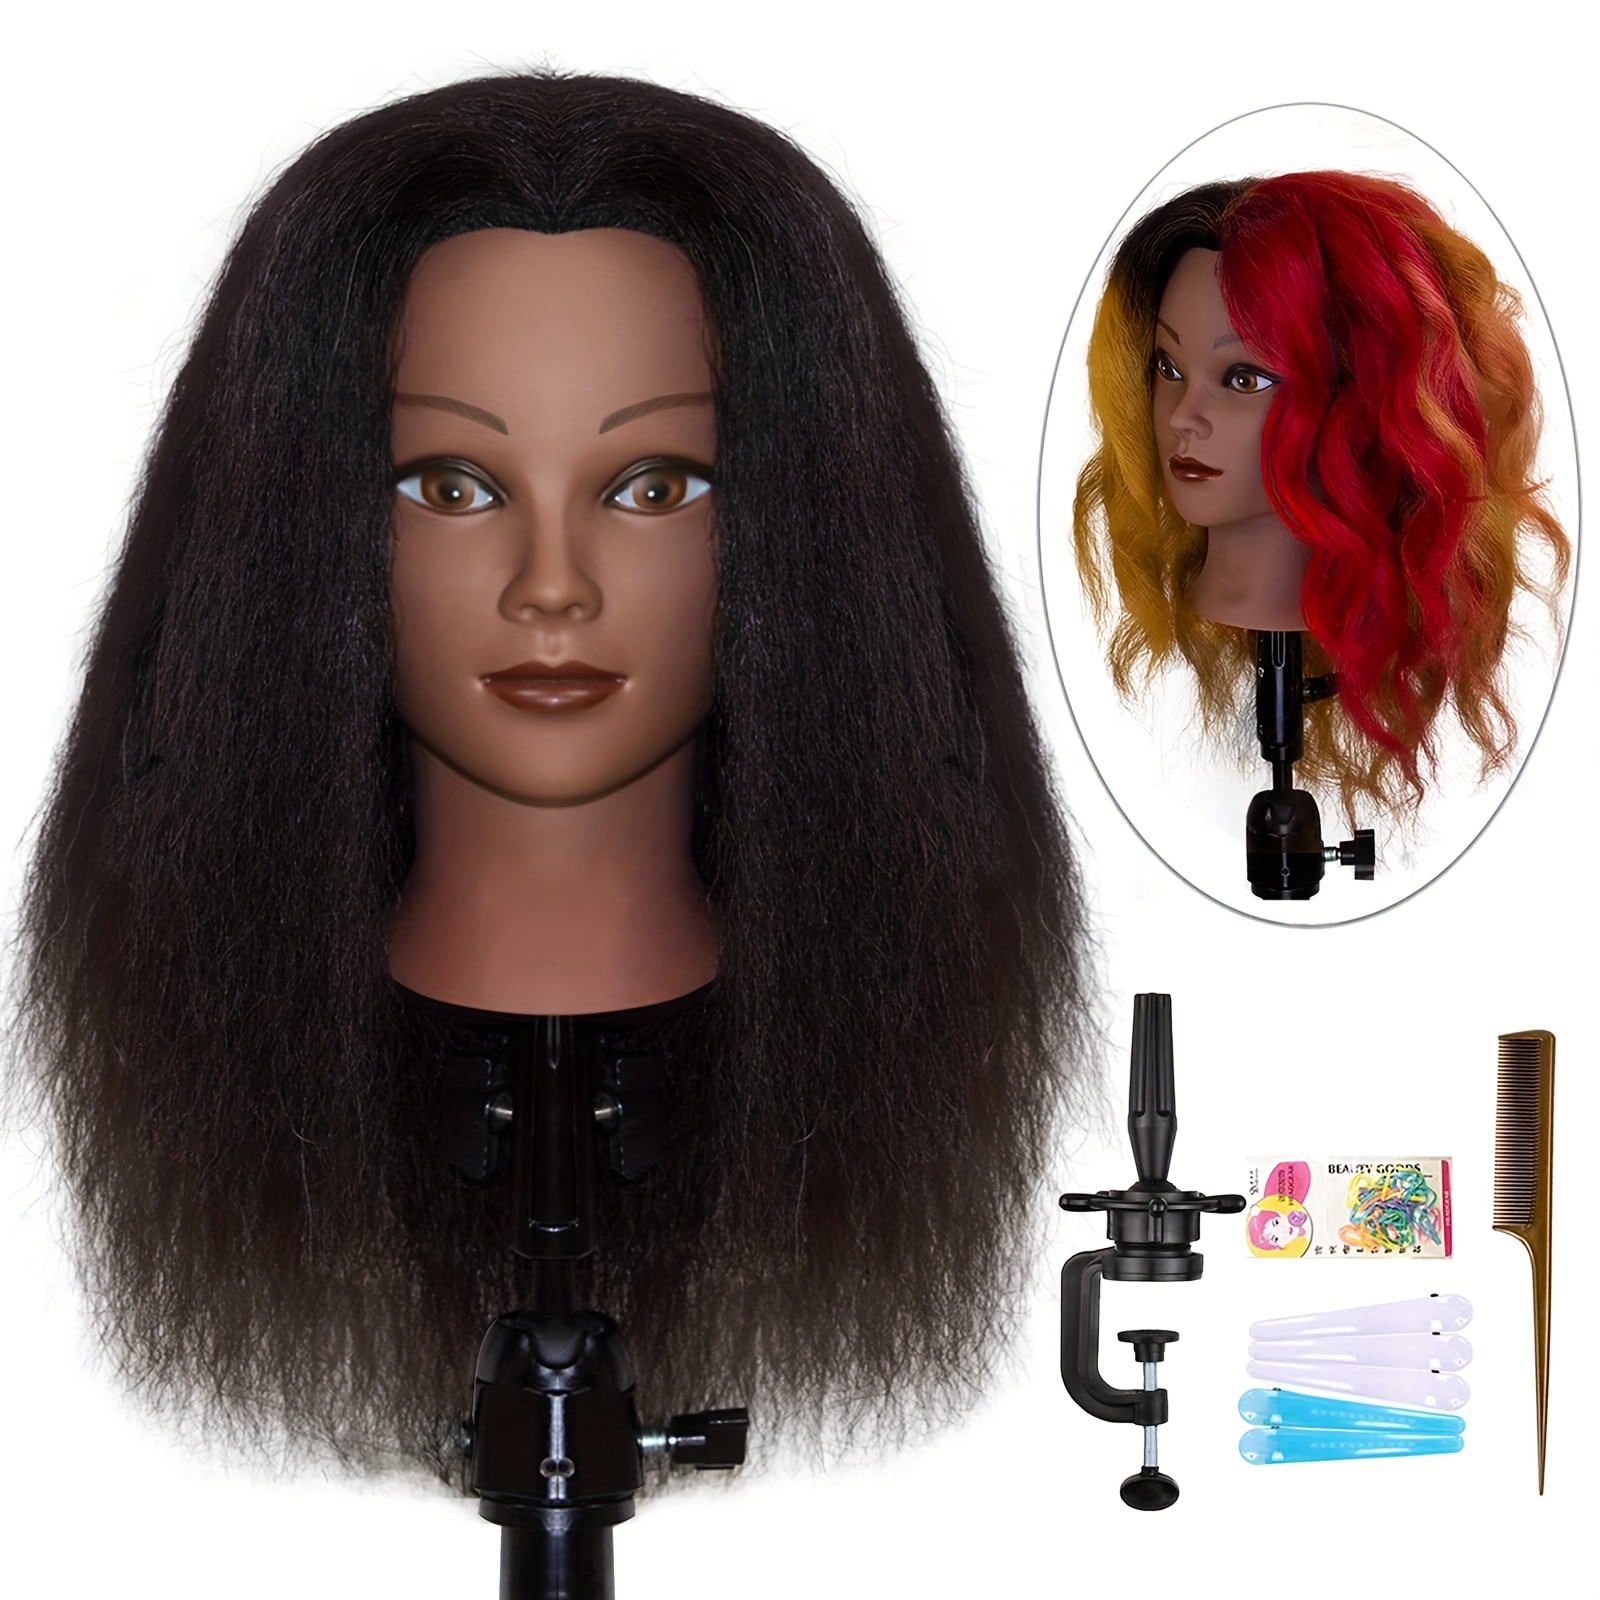  Beauty Star Mannequin Head with 80% Real Human Hair